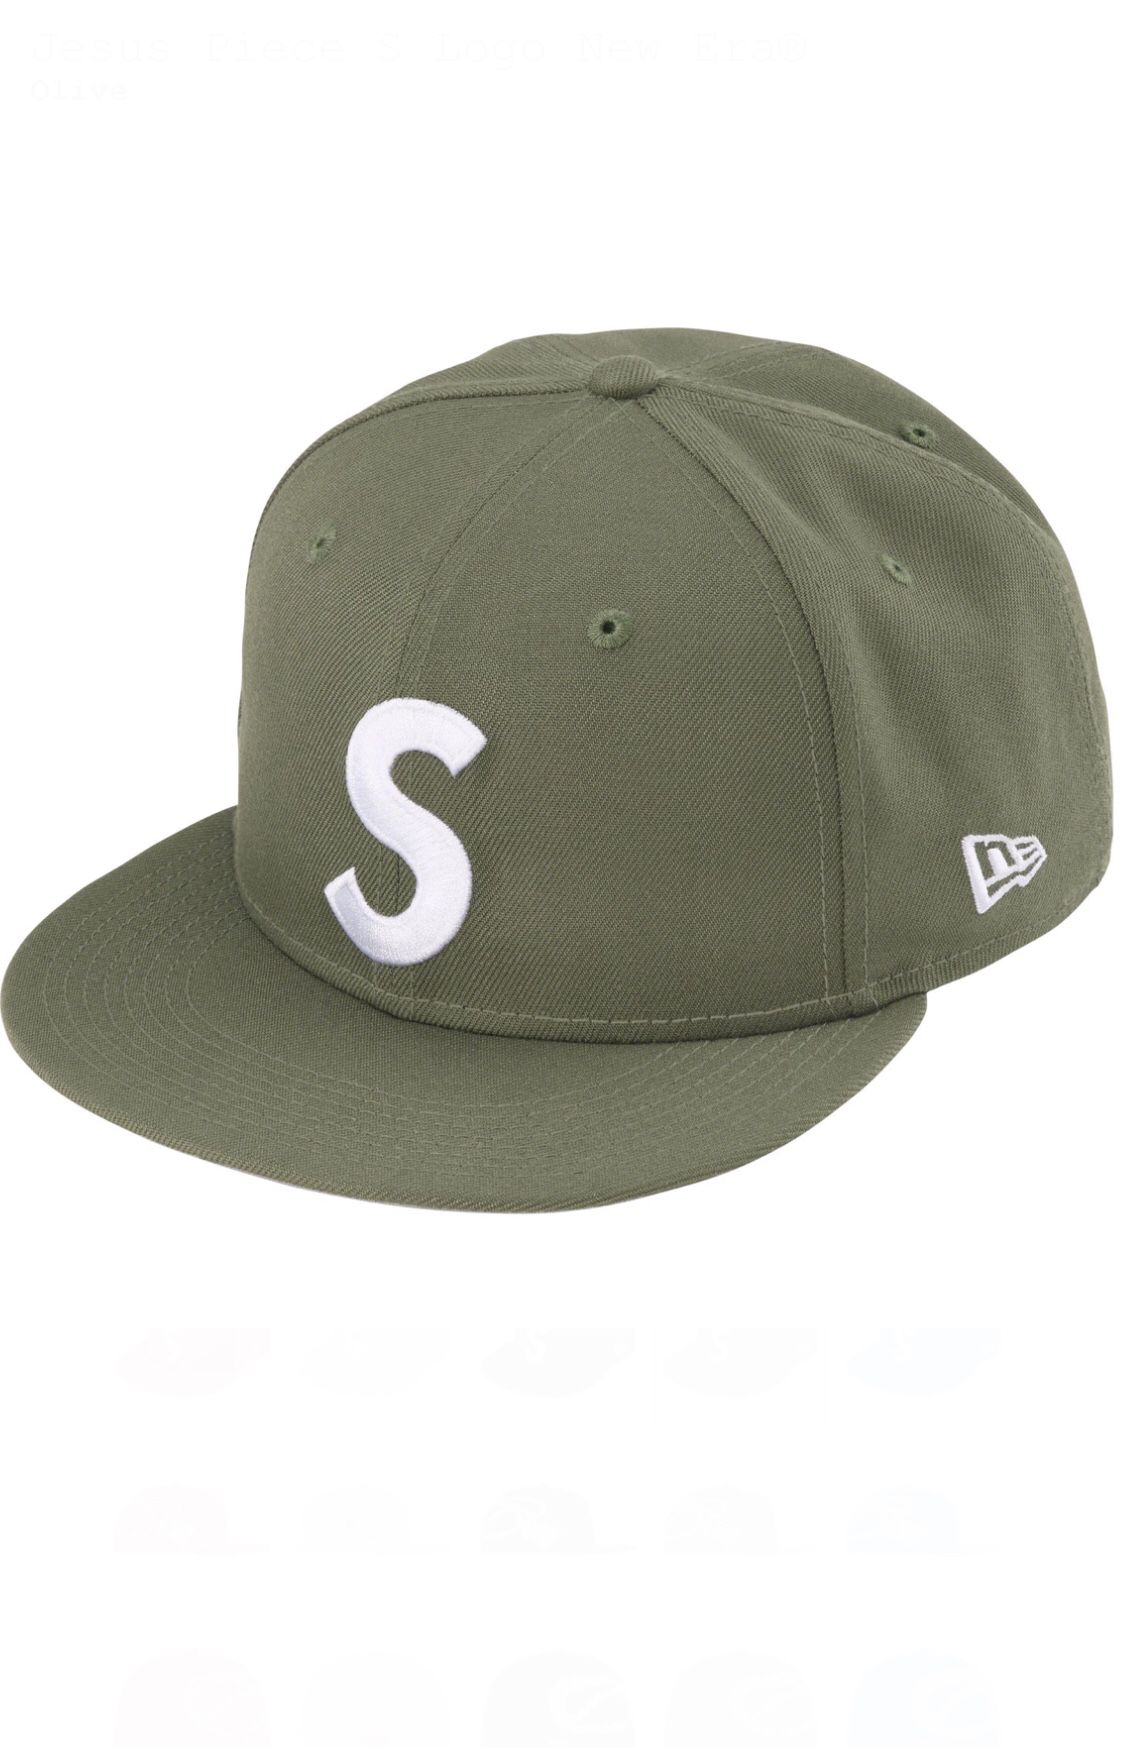 SUPREME JESUS PIECE FITTED HAT SIZE 7 3/8